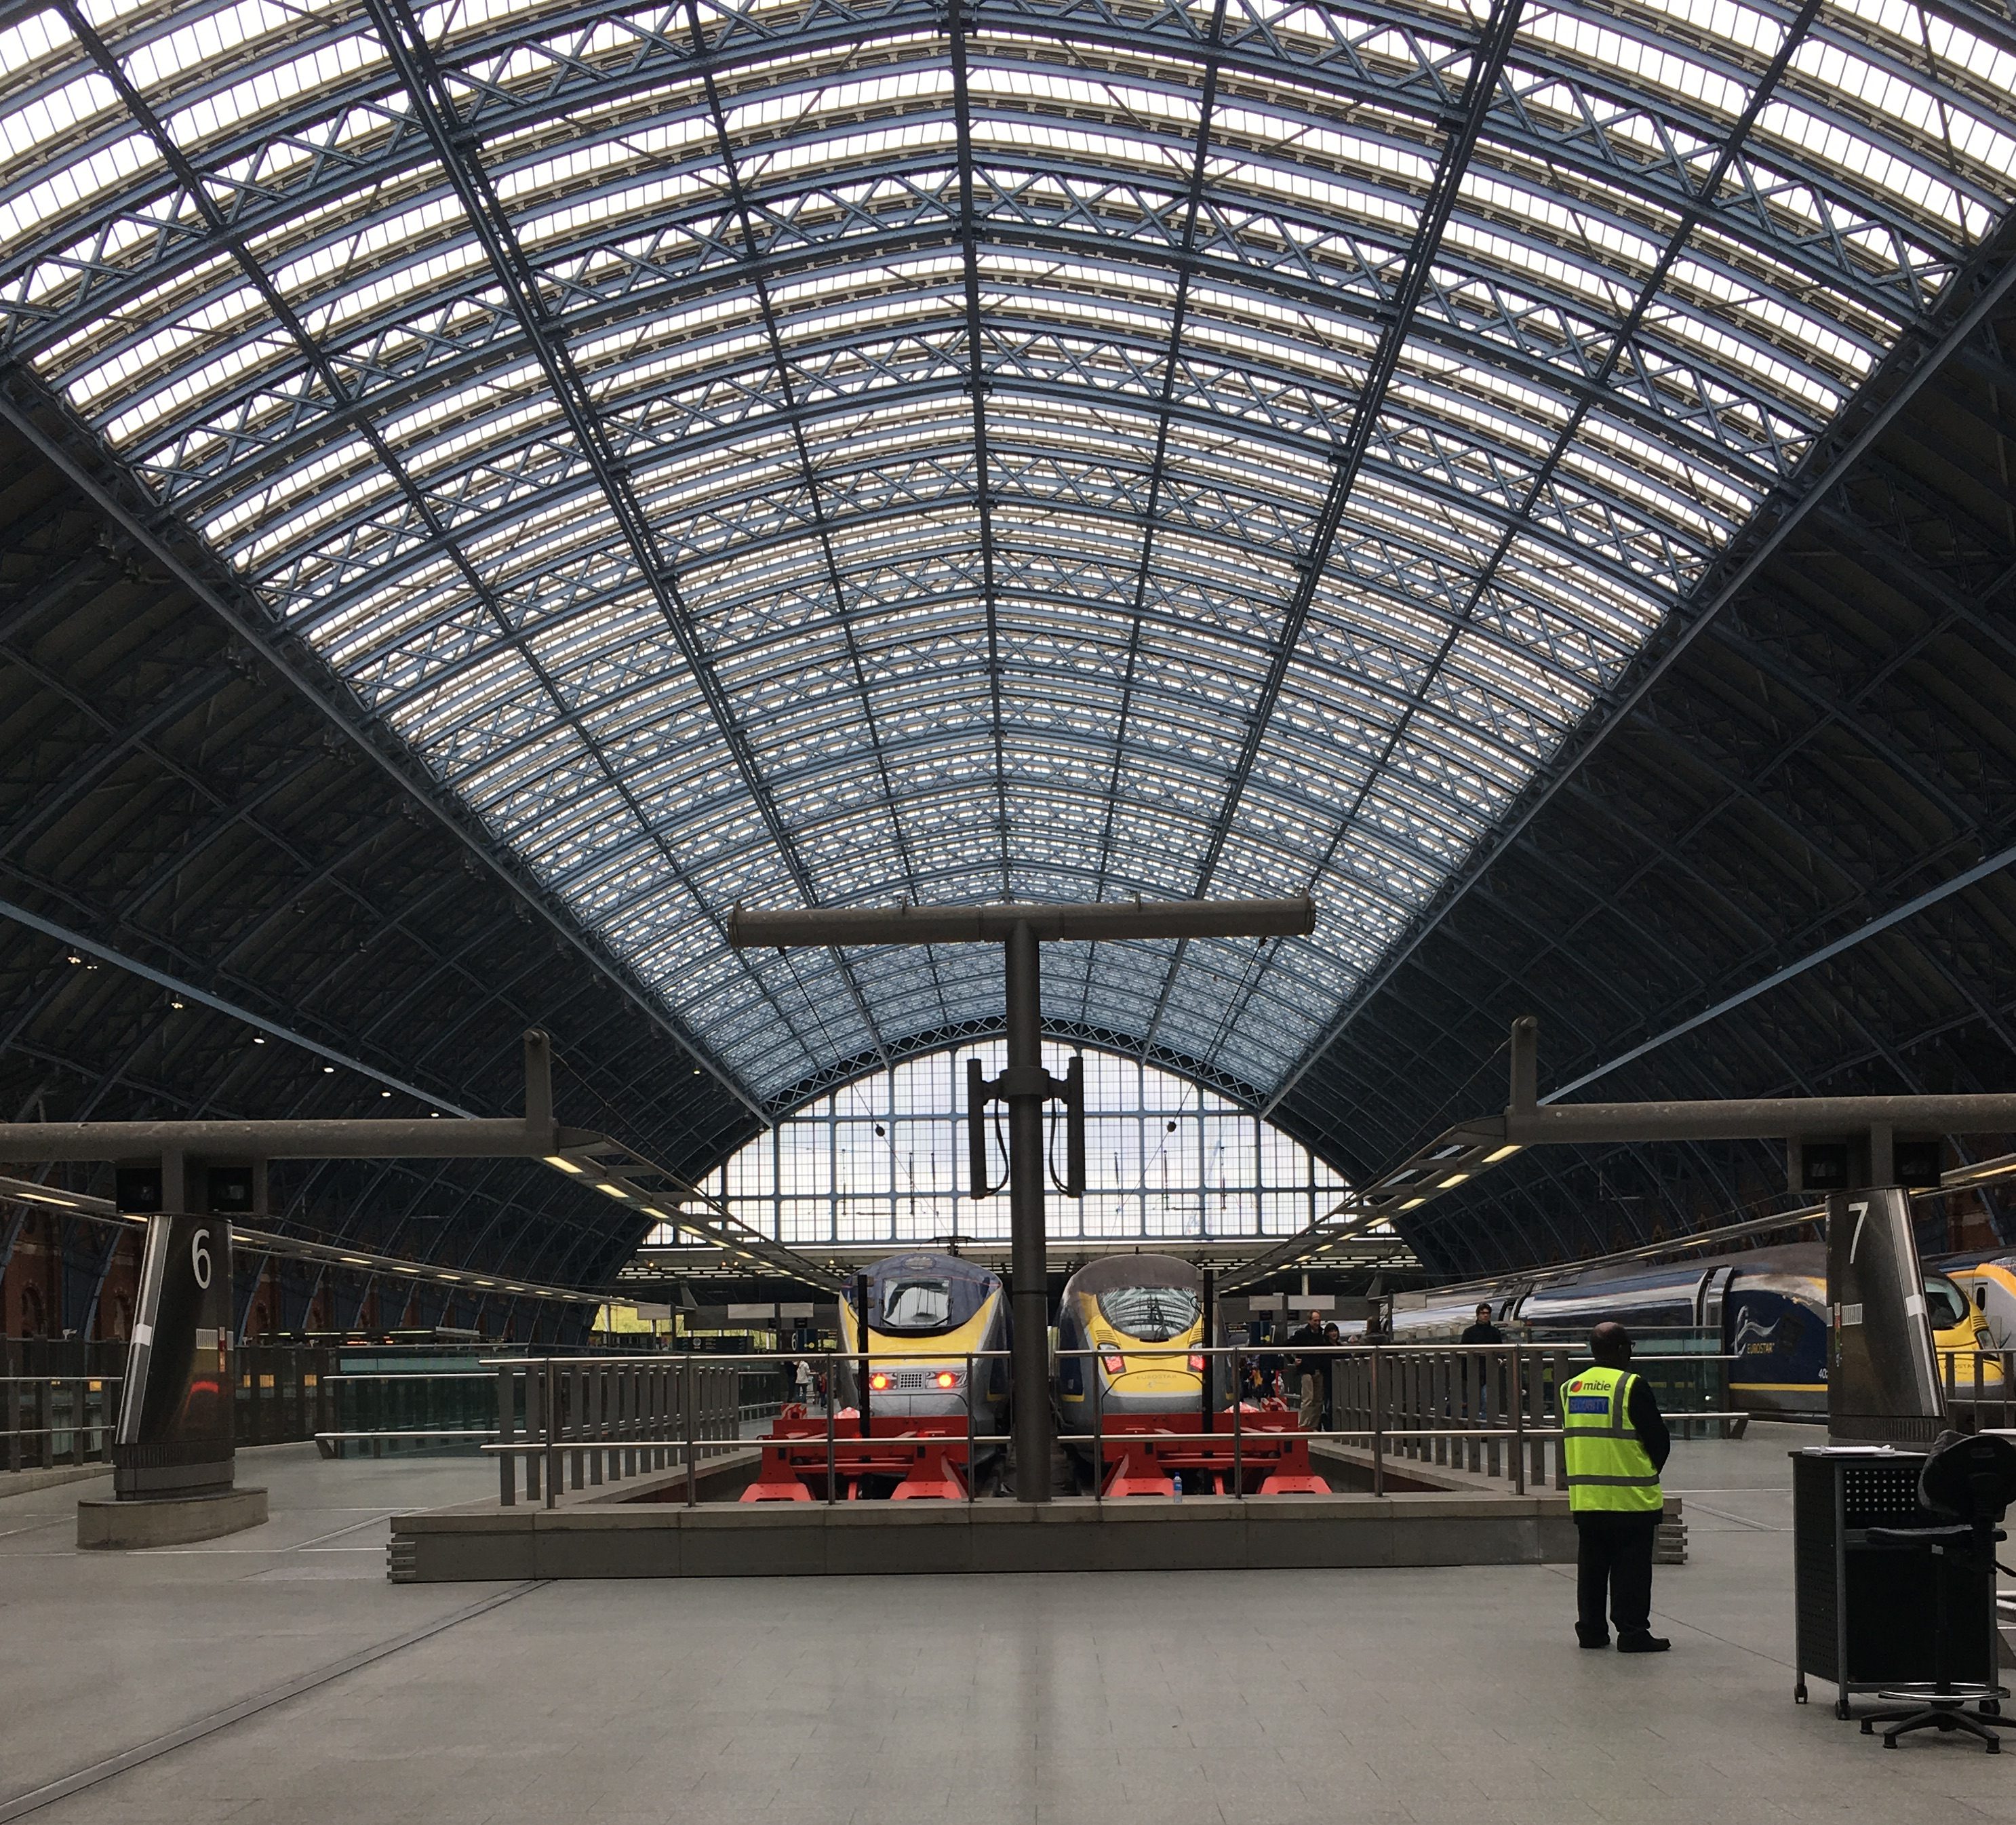 The front of Eurostar trains at St Pancras International Station, London